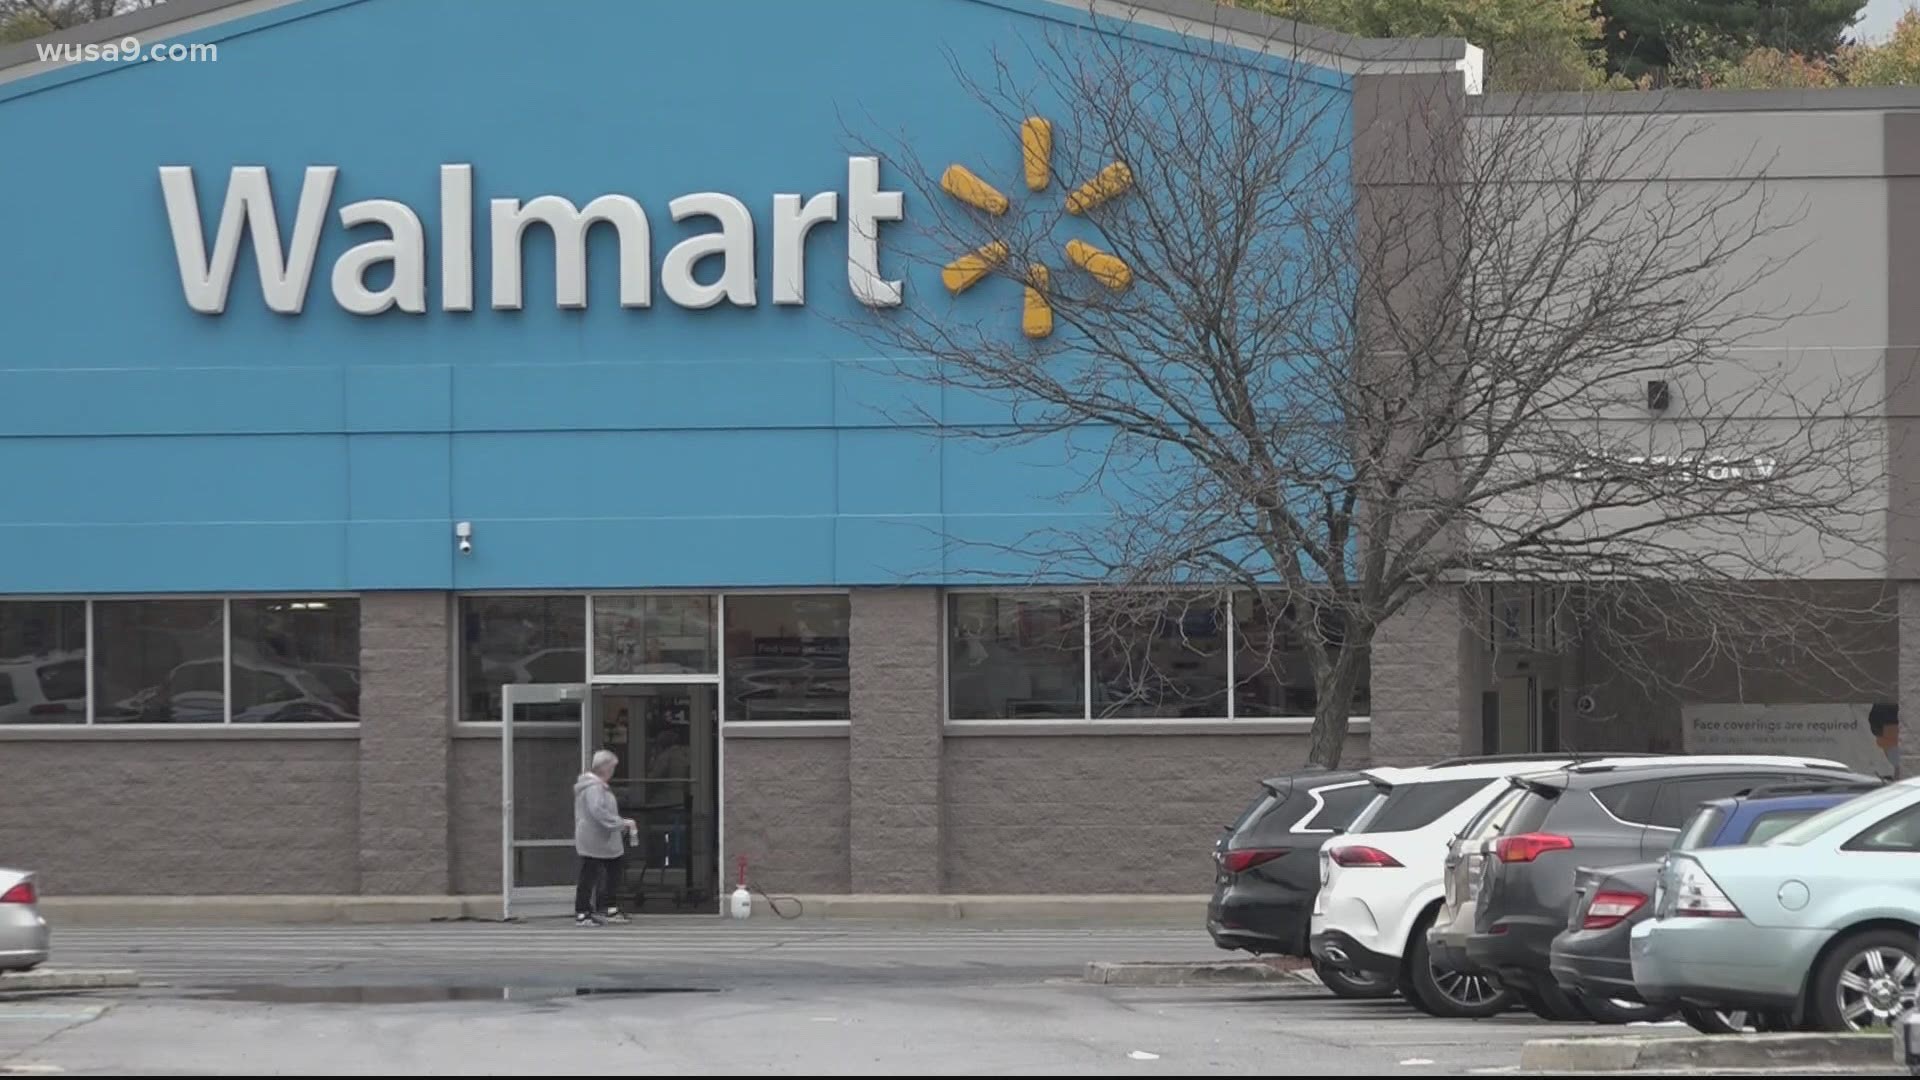 Walmart on Friday said it is returning guns and ammunition to store floors, describing incidents of what the retailer called "civil unrest" in several of its stores